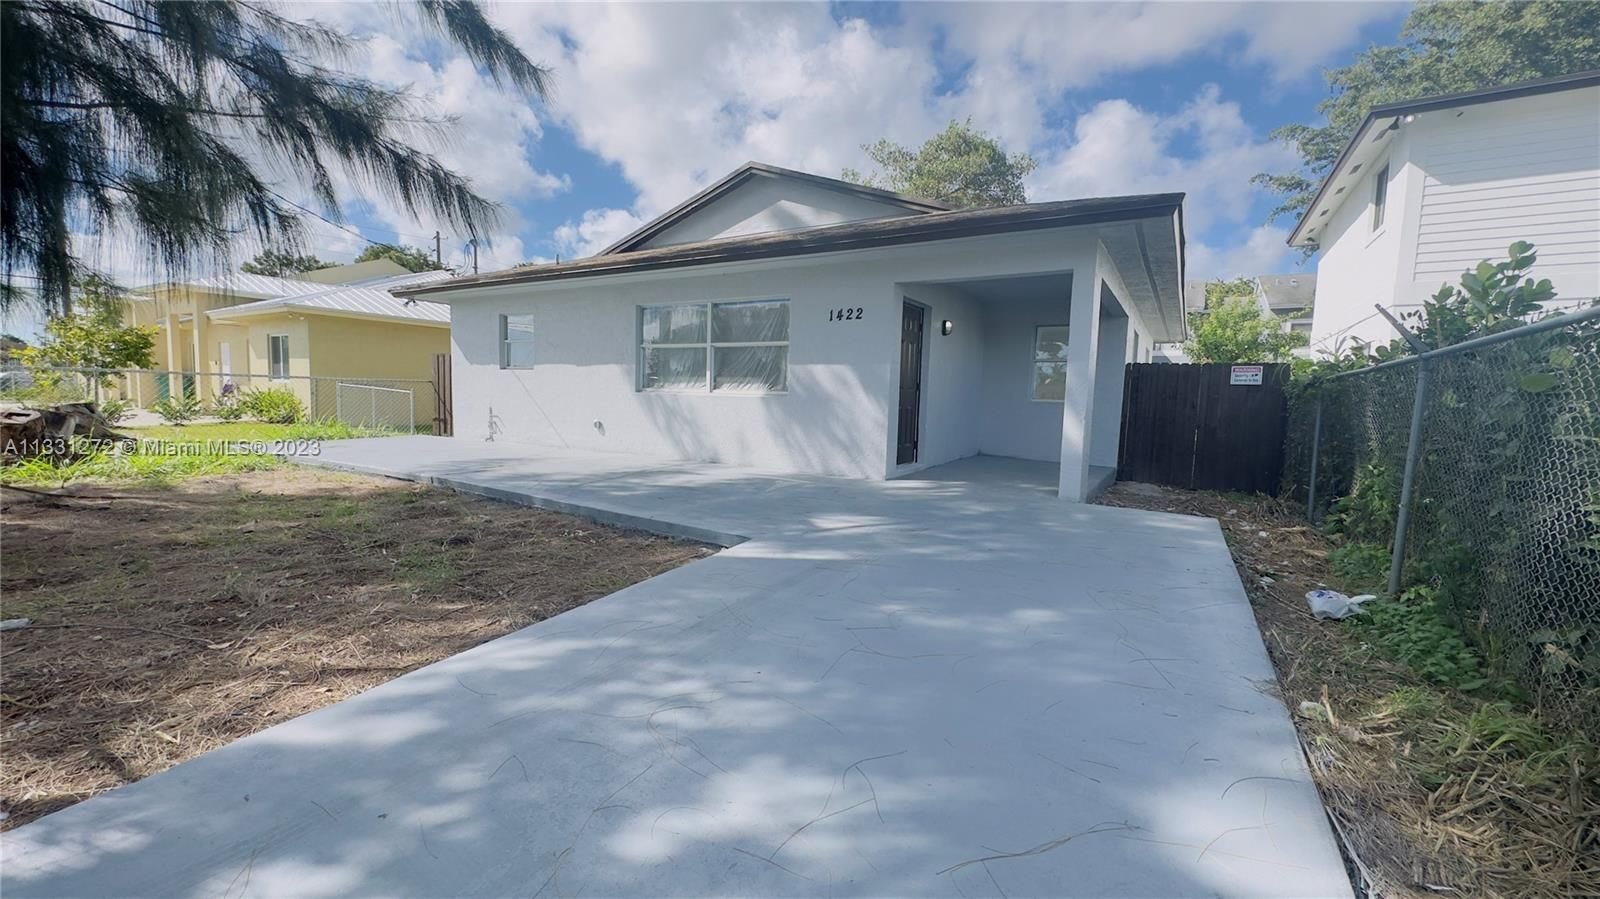 Real estate property located at 1422 8th Ave, Miami-Dade County, Florida City, FL